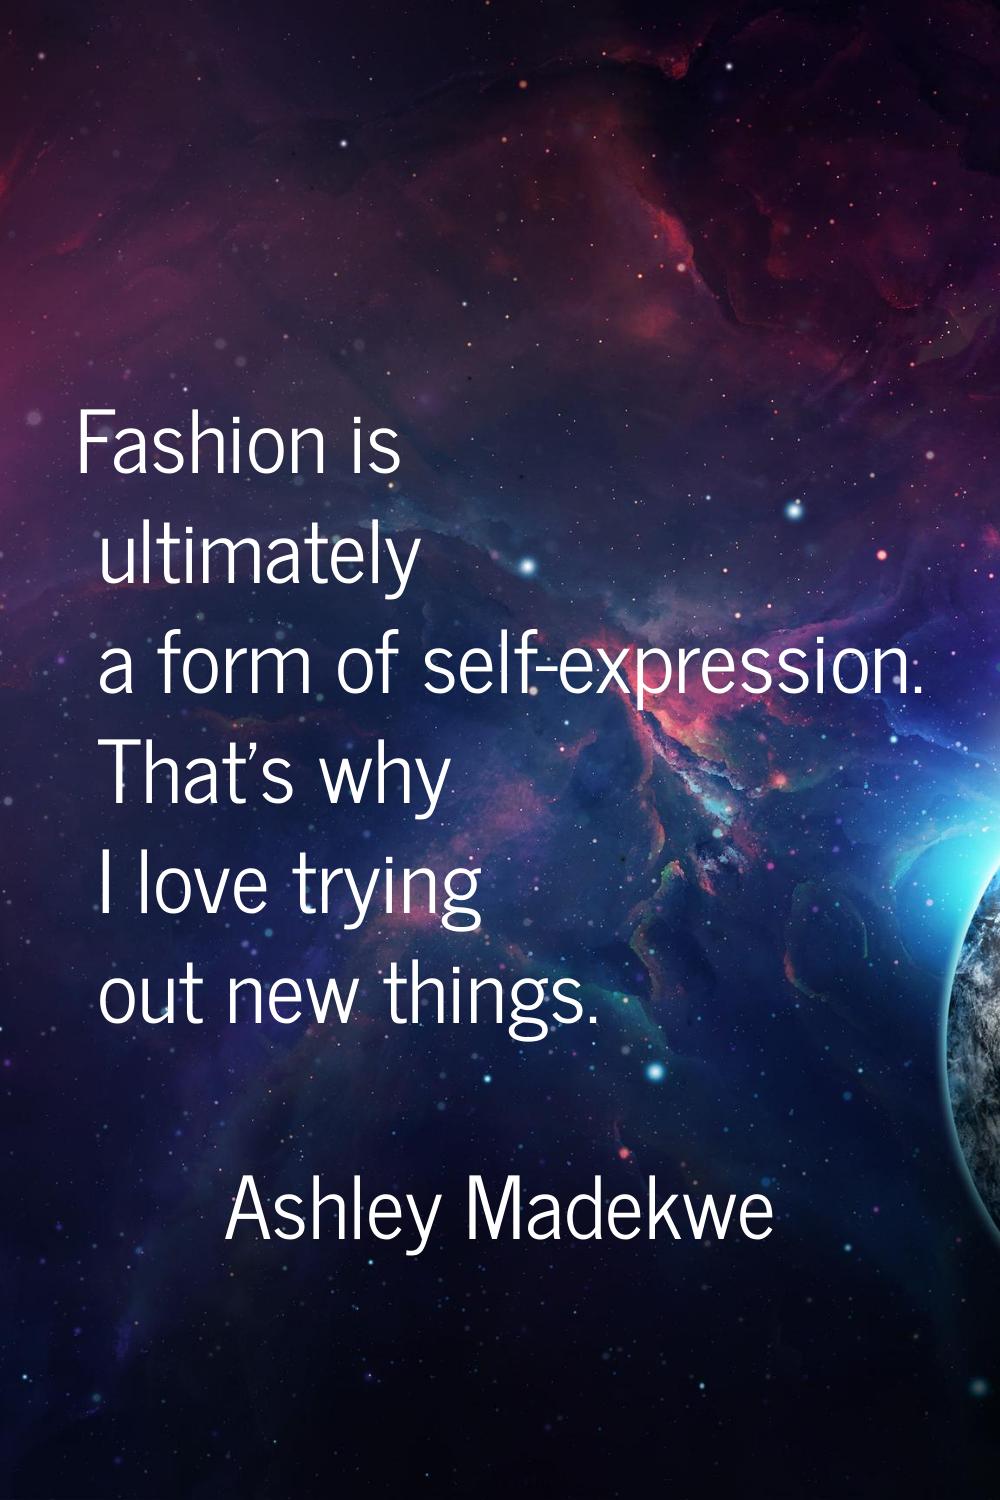 Fashion is ultimately a form of self-expression. That's why I love trying out new things.